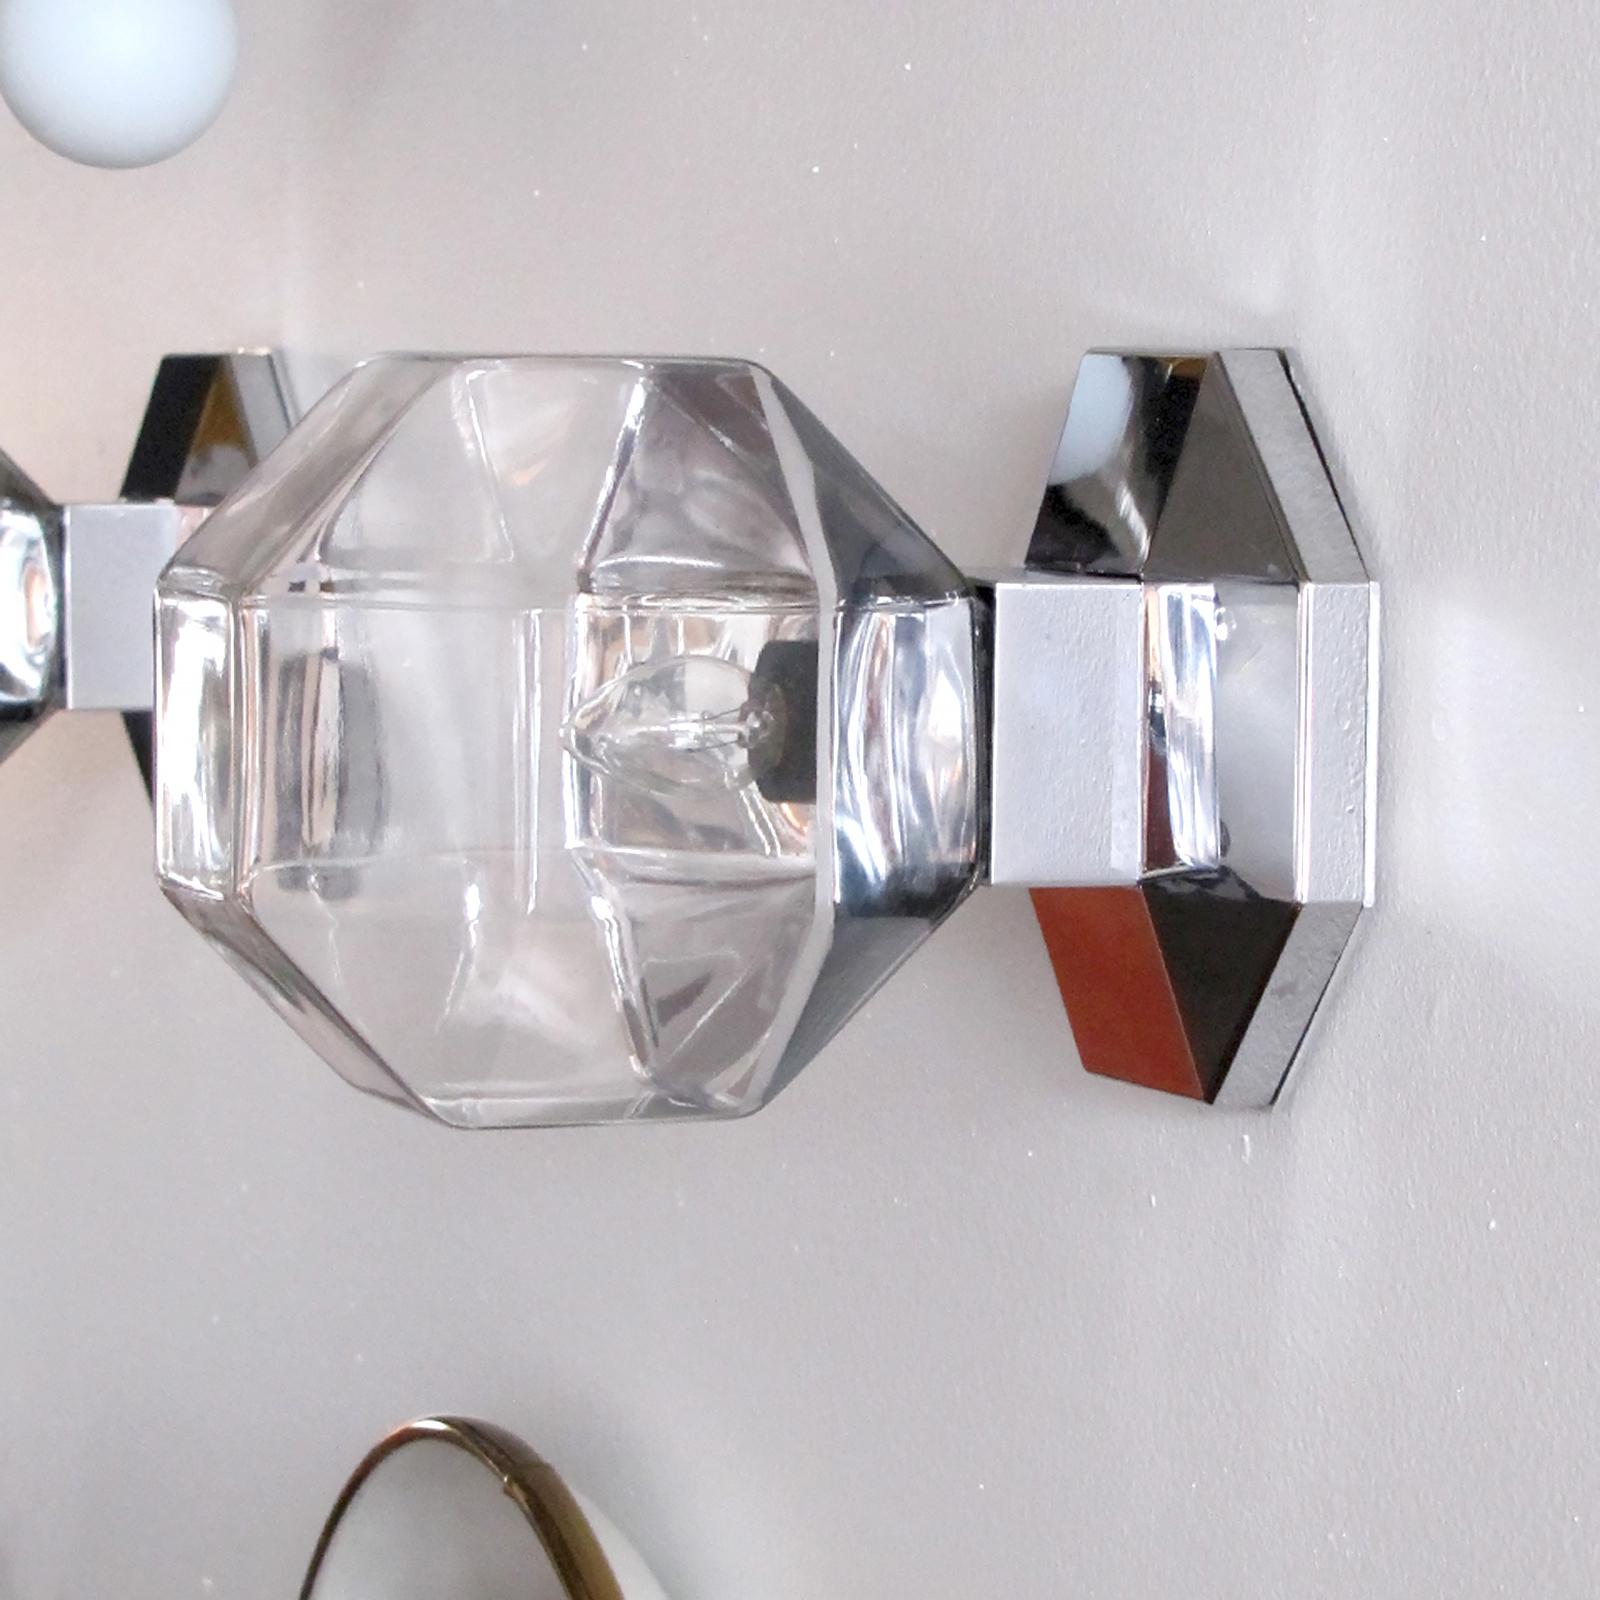 Plated Modular Staff Wall or Ceiling Lights by Motoko Ishii, 1970 For Sale